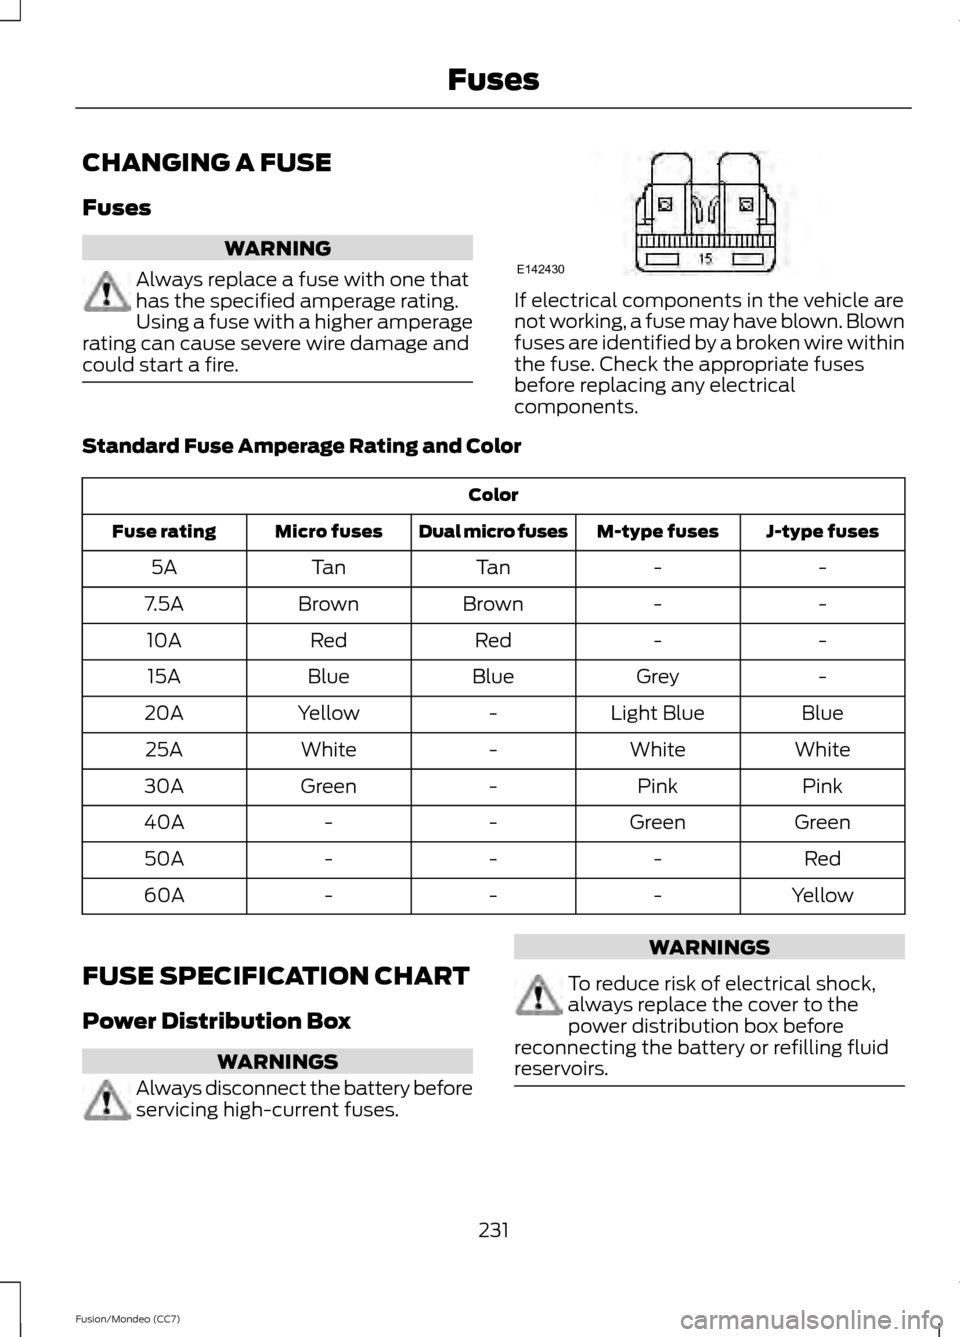 FORD FUSION (AMERICAS) 2013 2.G Owners Manual CHANGING A FUSE
Fuses
WARNING
Always replace a fuse with one that
has the specified amperage rating.
Using a fuse with a higher amperage
rating can cause severe wire damage and
could start a fire. If 